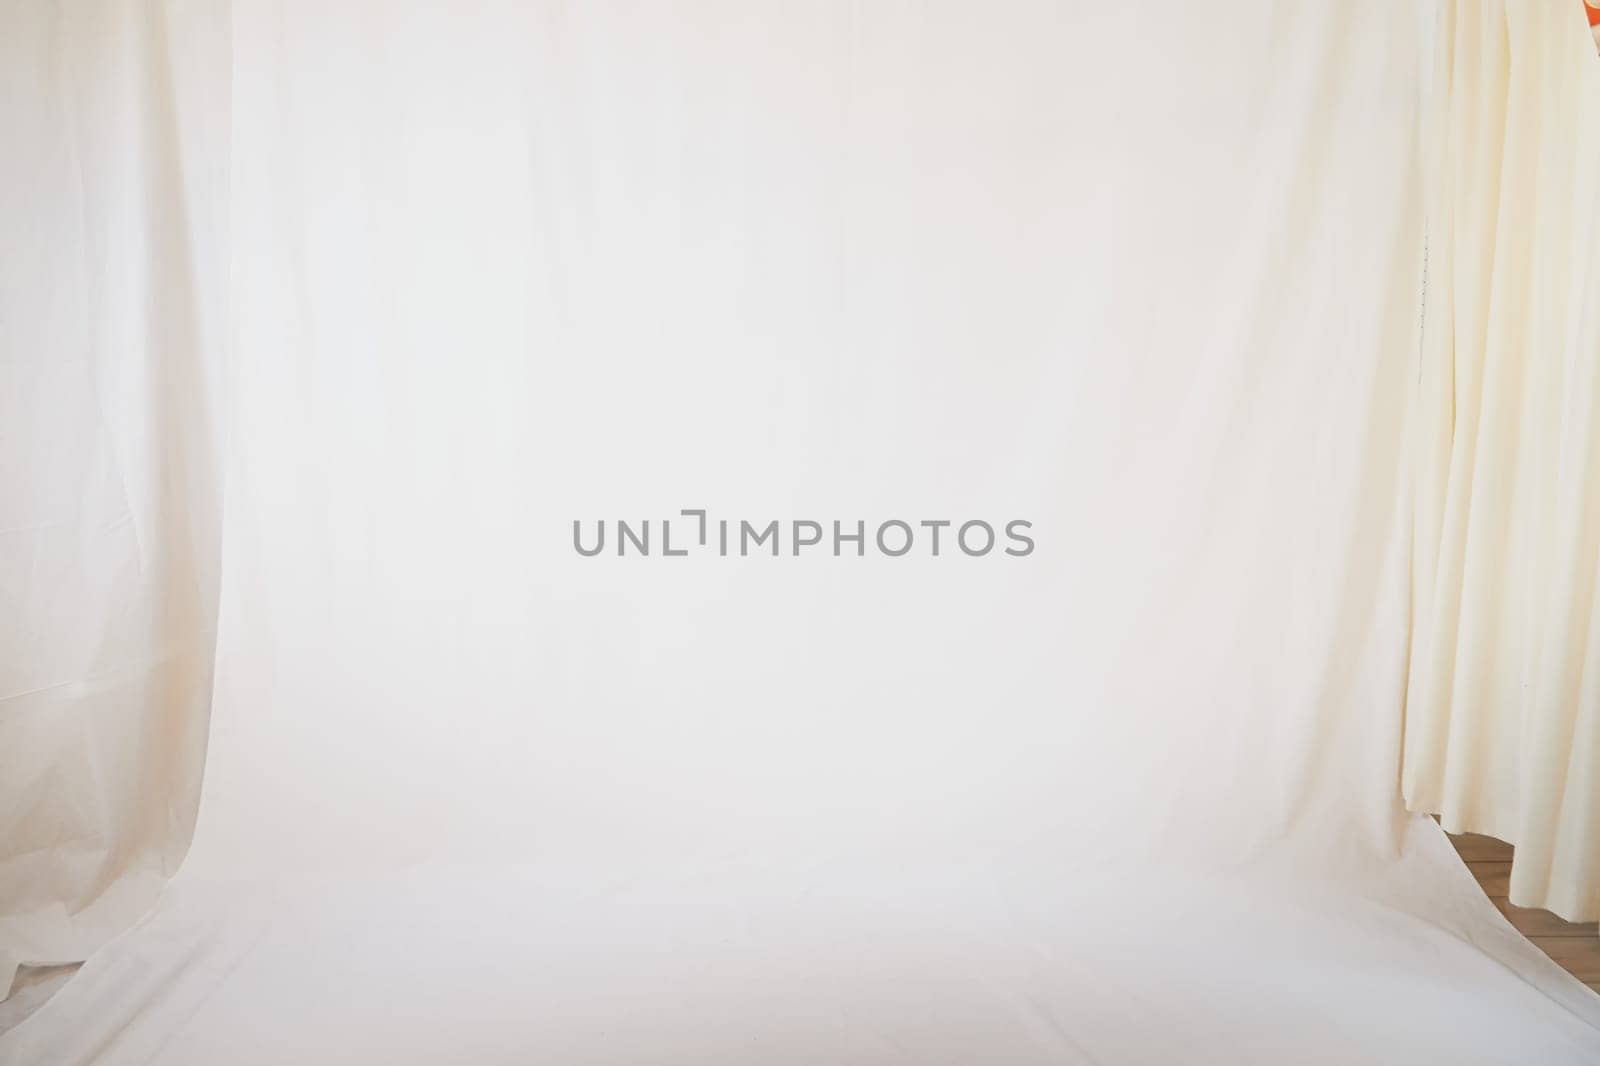 White fabric background and light curtains. Location, frame for shooting in a photo studio. Theater stage for backstage performances by keleny